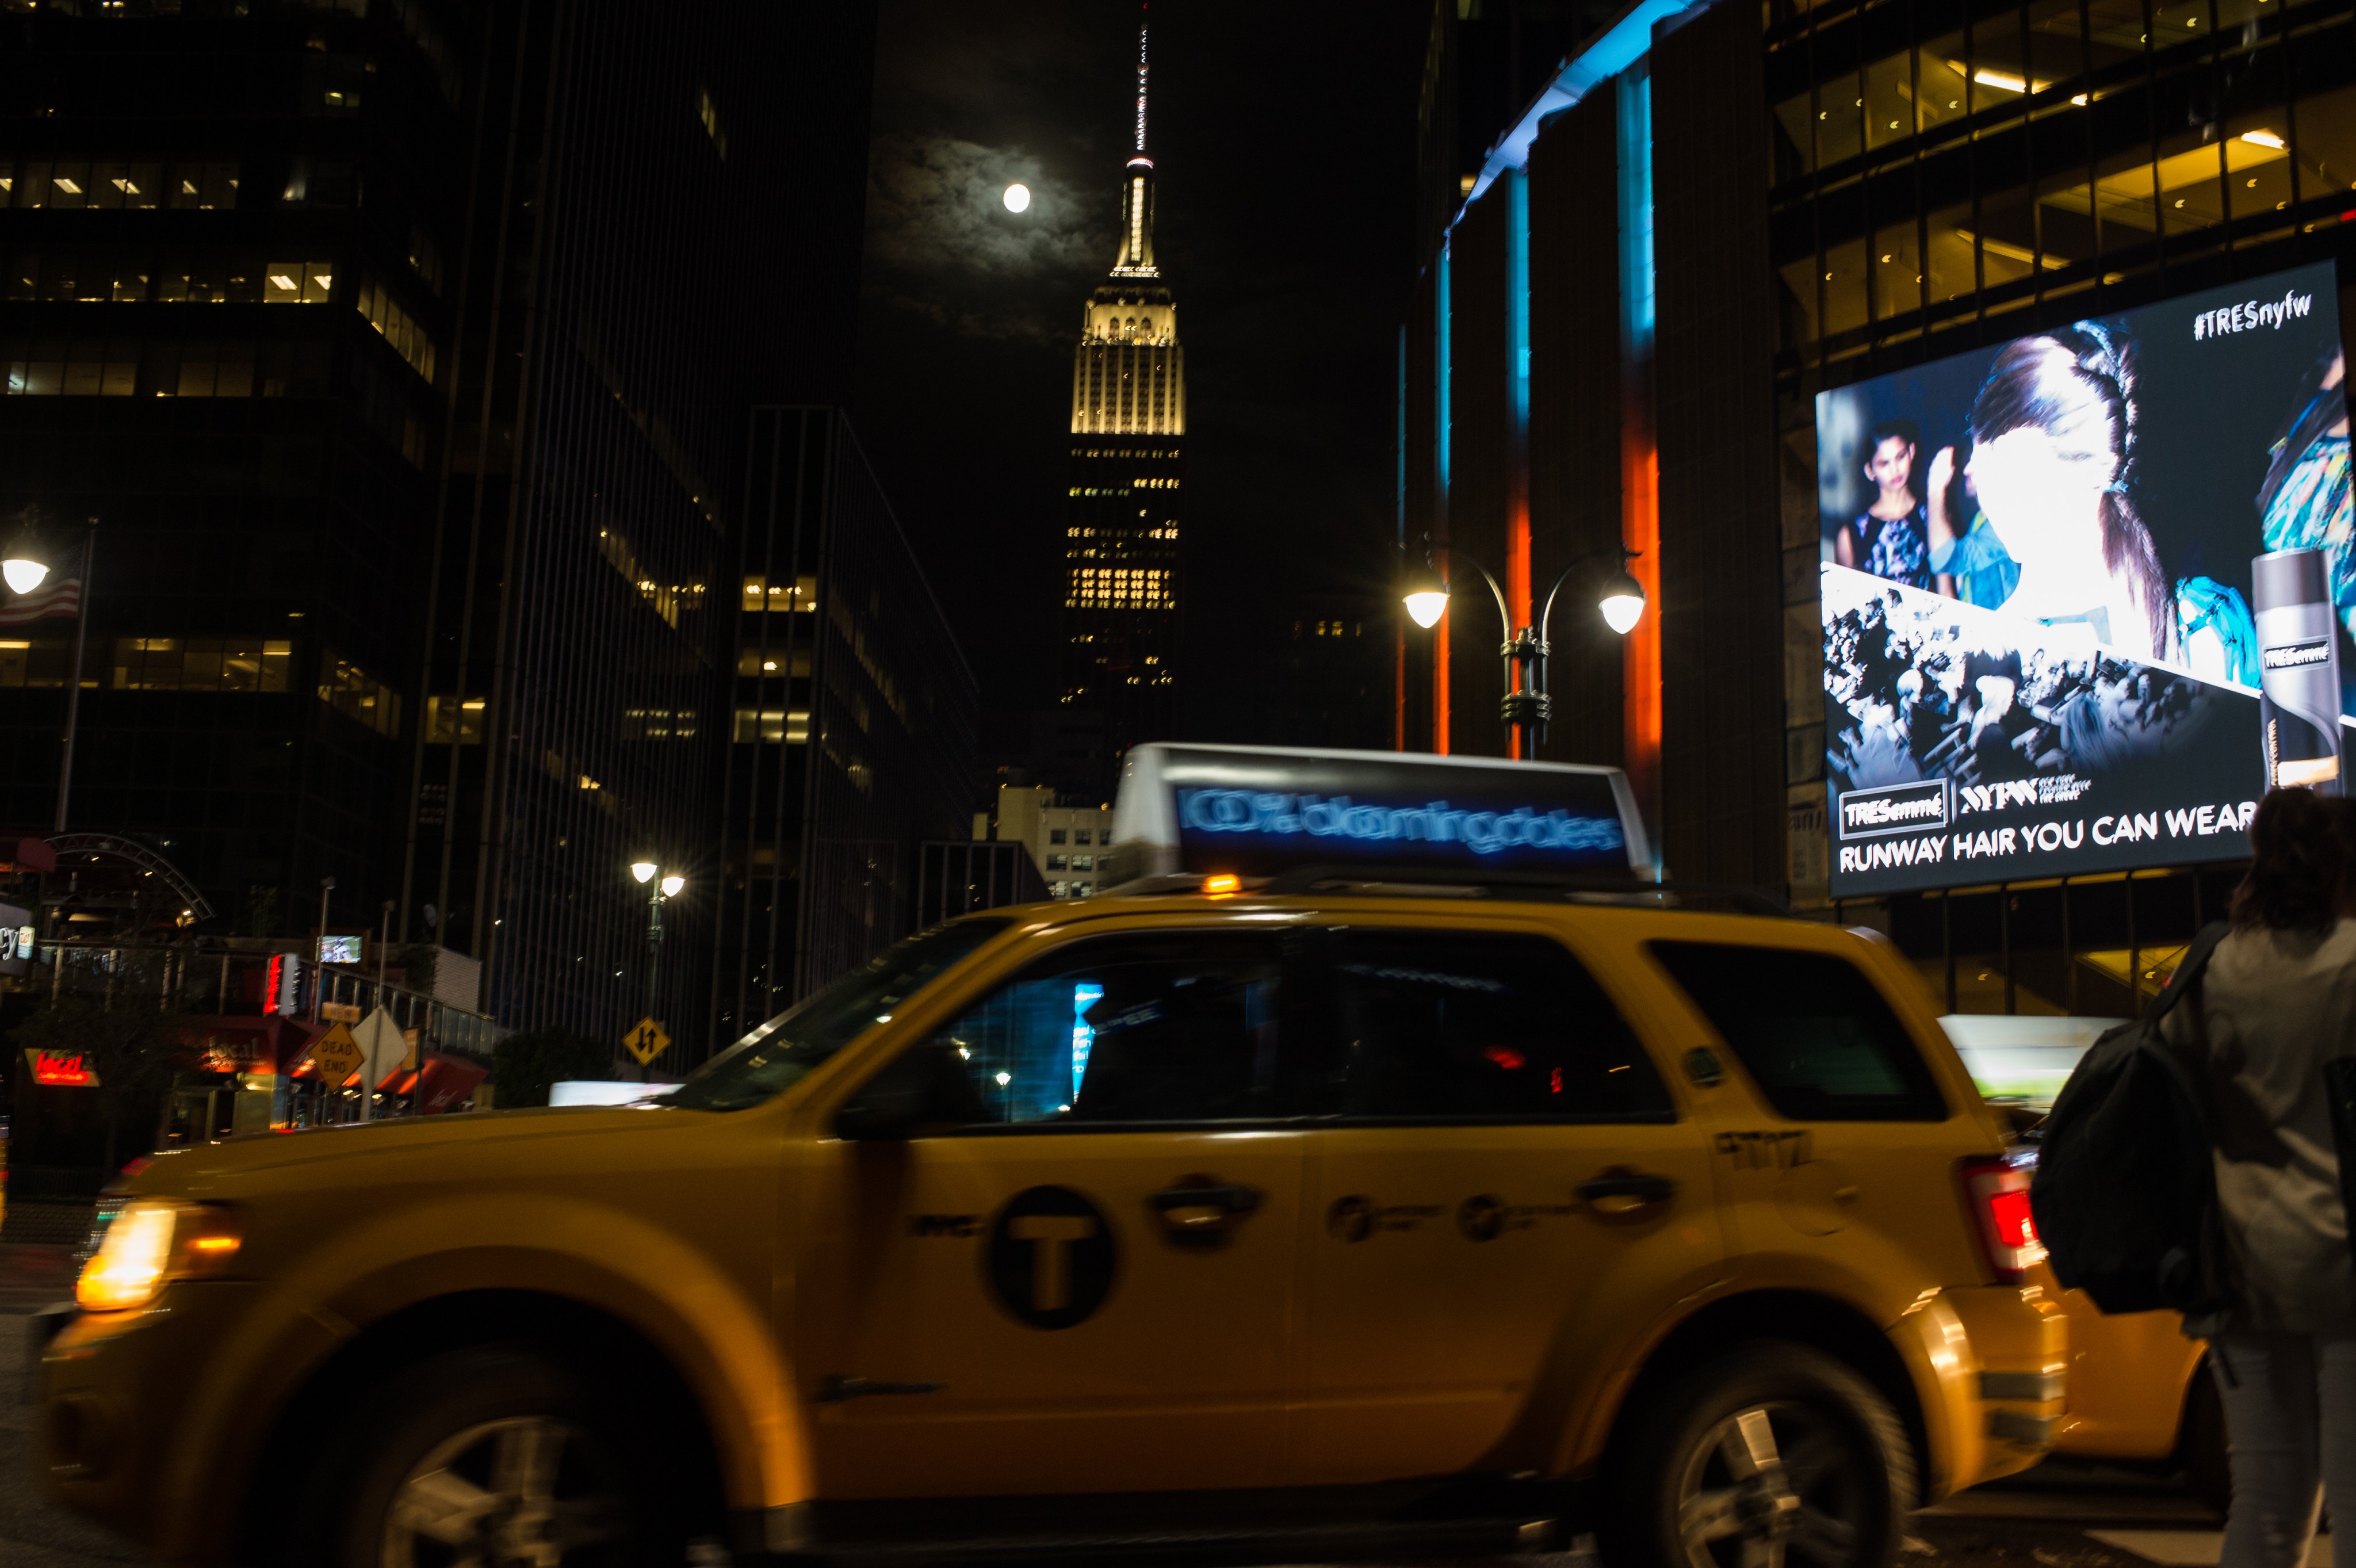 The full moon is visible next to the Empire State Building in this photo of New York City. A cab is rushing across the image in the foreground.